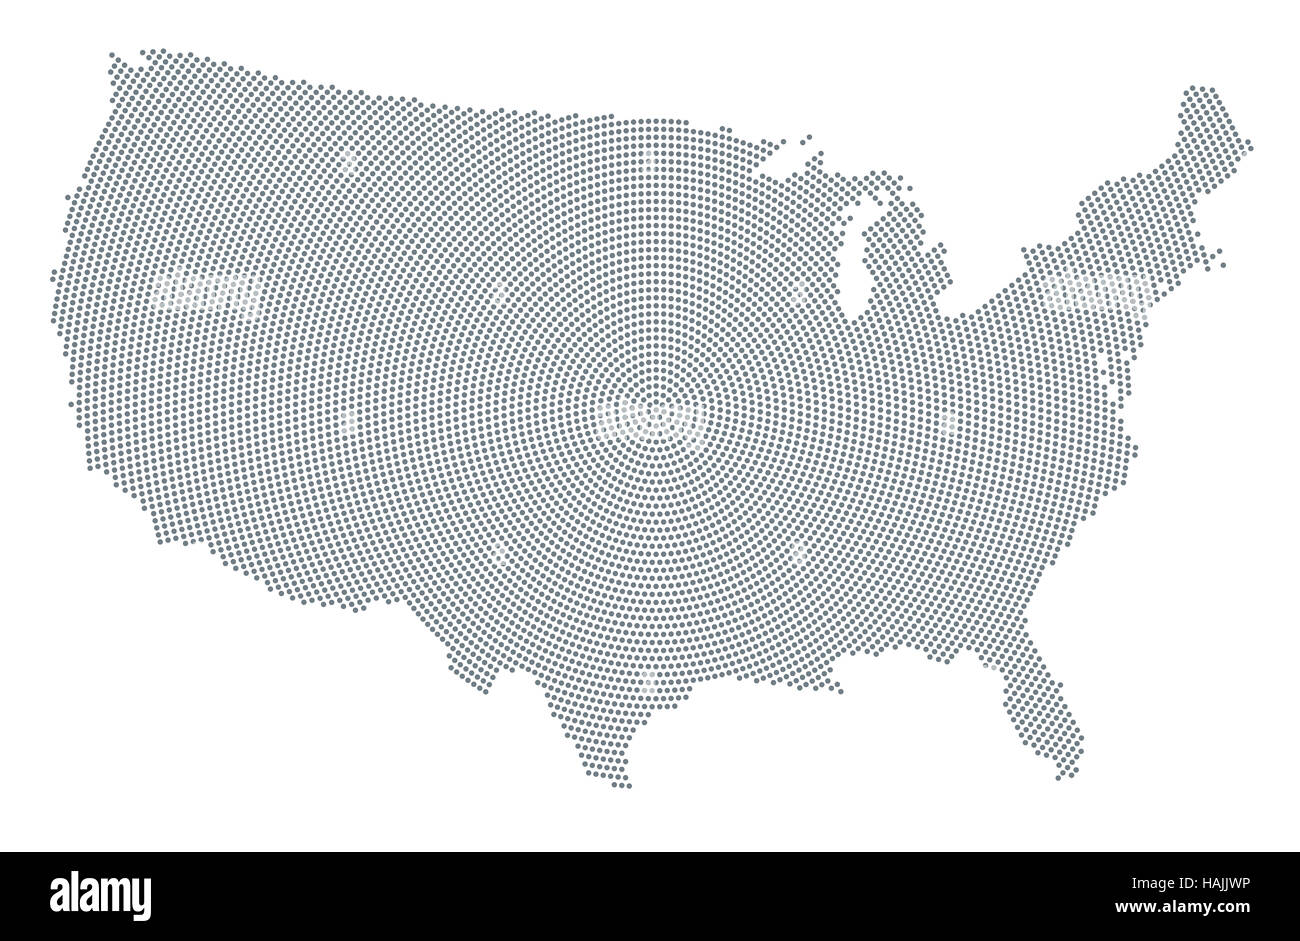 United States of America map radial dot pattern. Gray dots going from the center outwards forming the silhouette of USA. Stock Photo